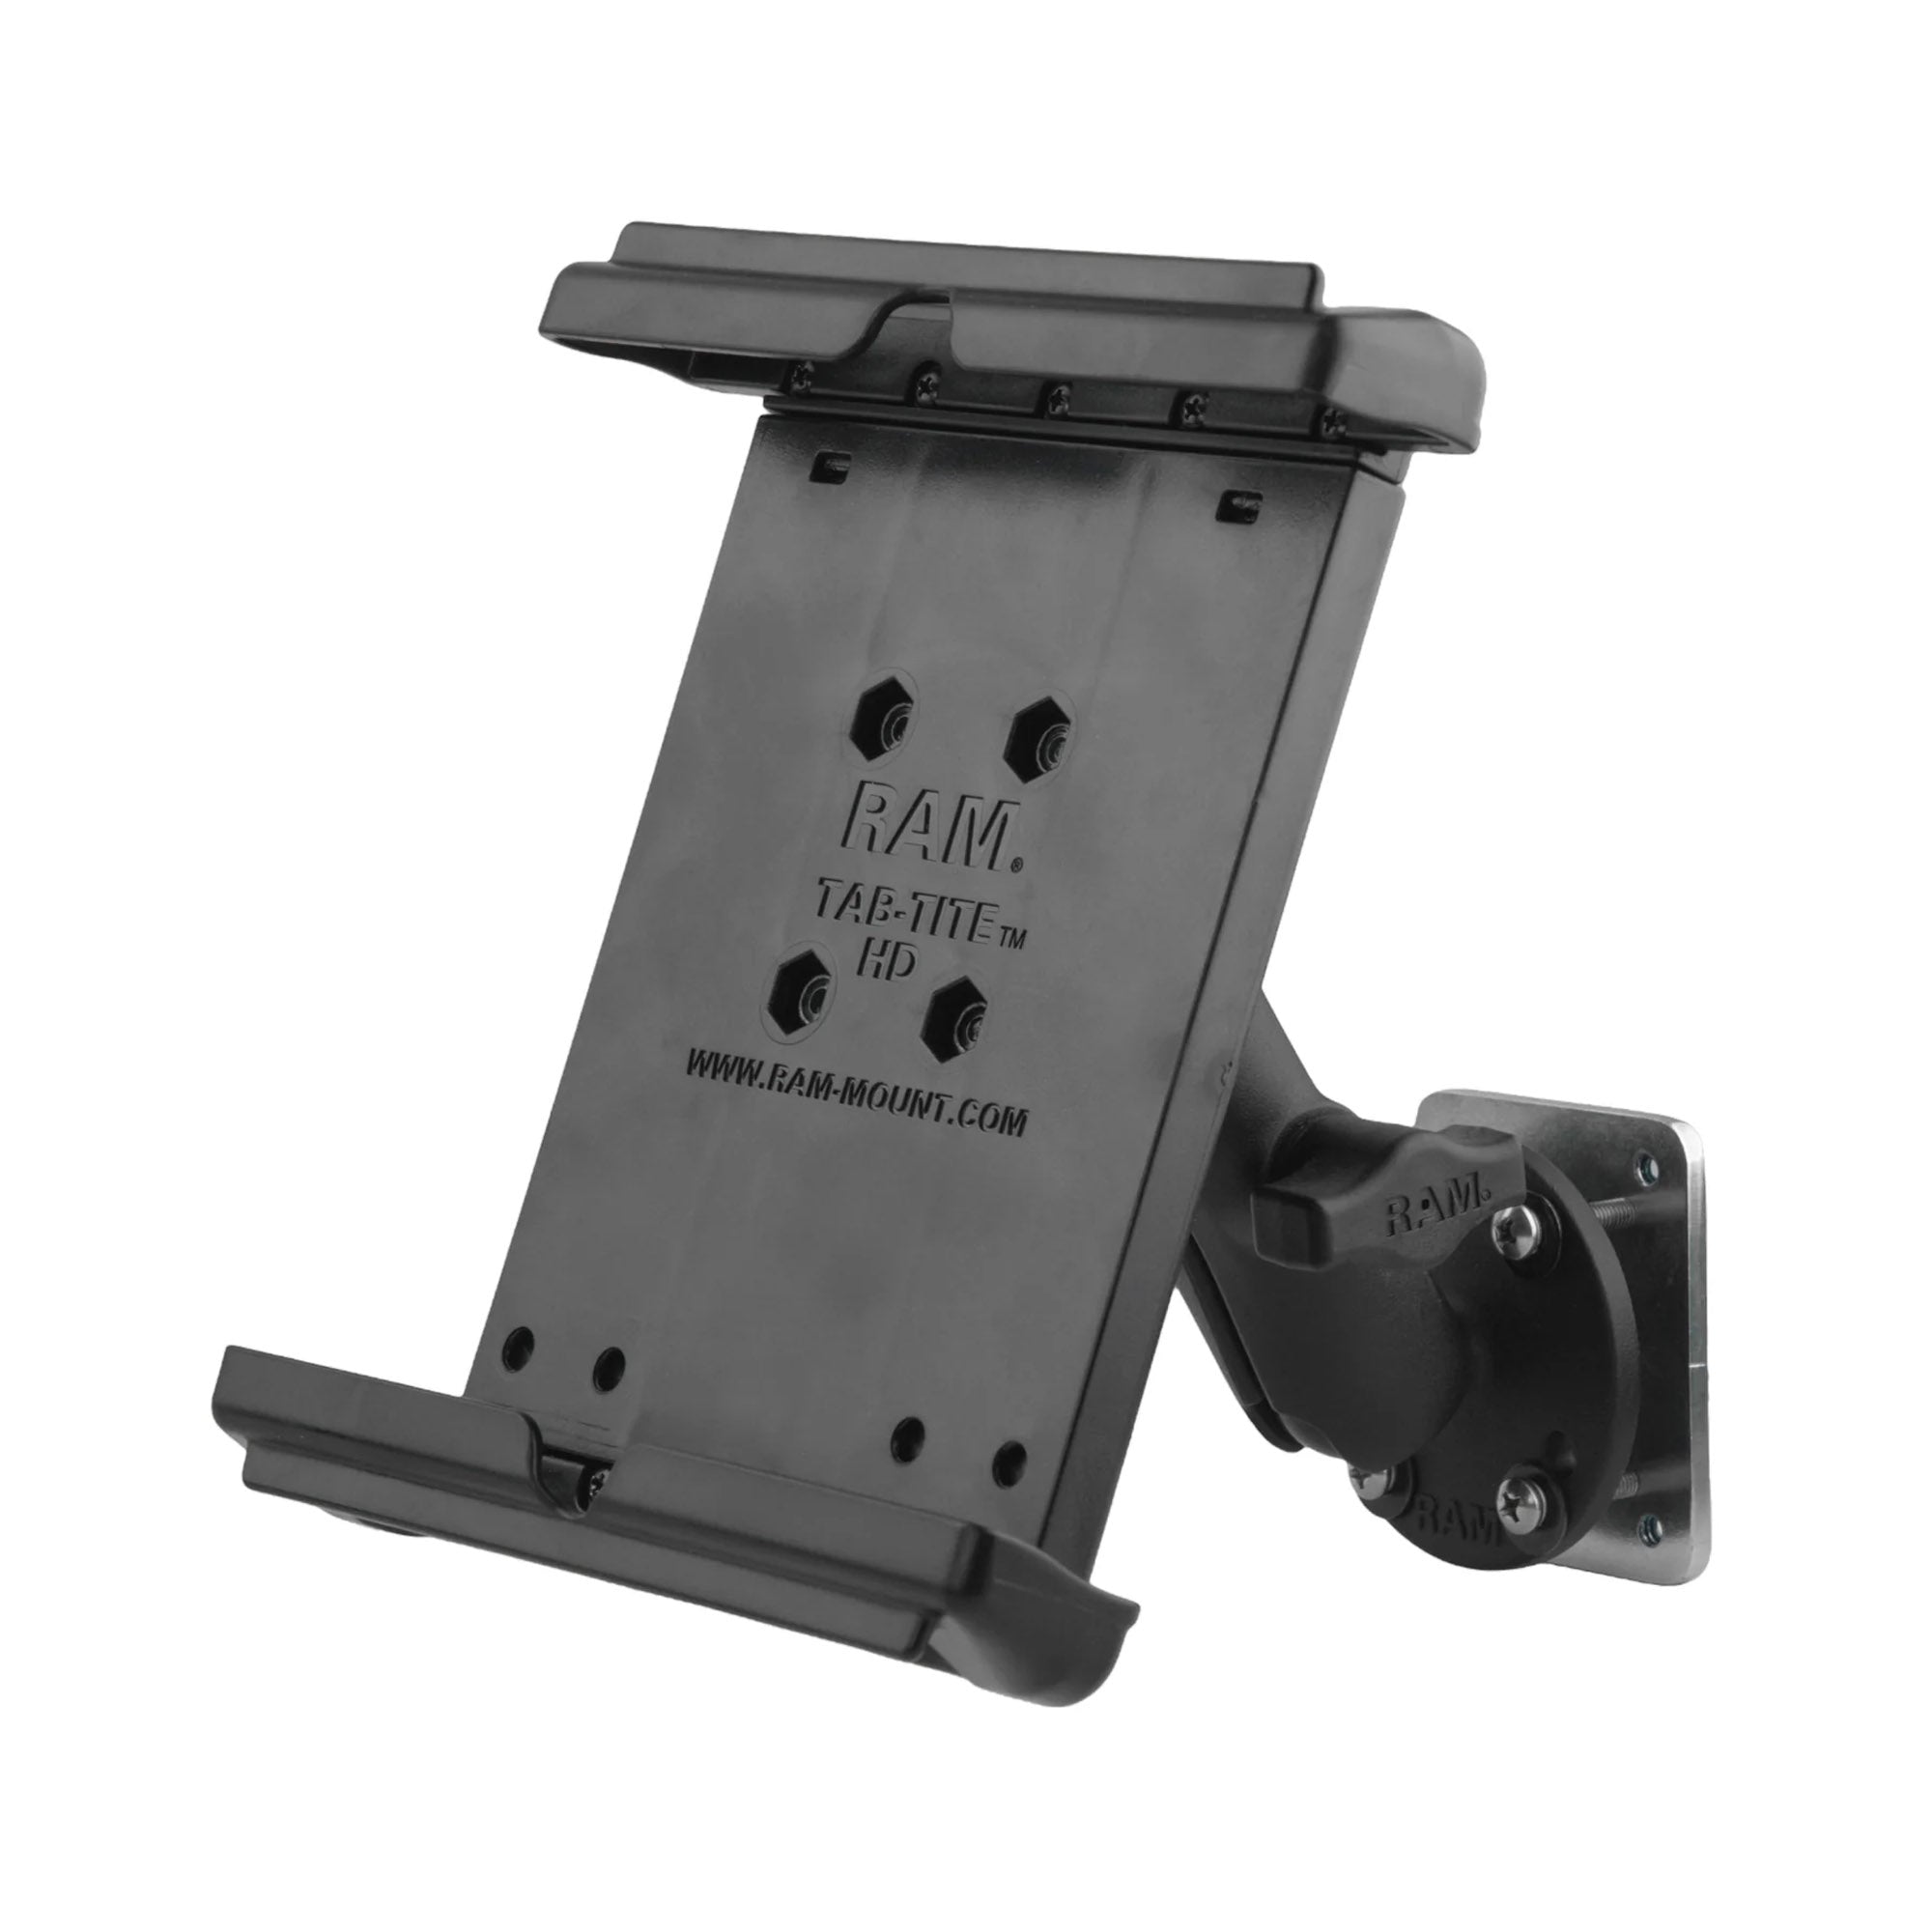 RAM Dashboard Mount with Backing Plate for 8" Tablets with Cases - B-Size - Medium Arm